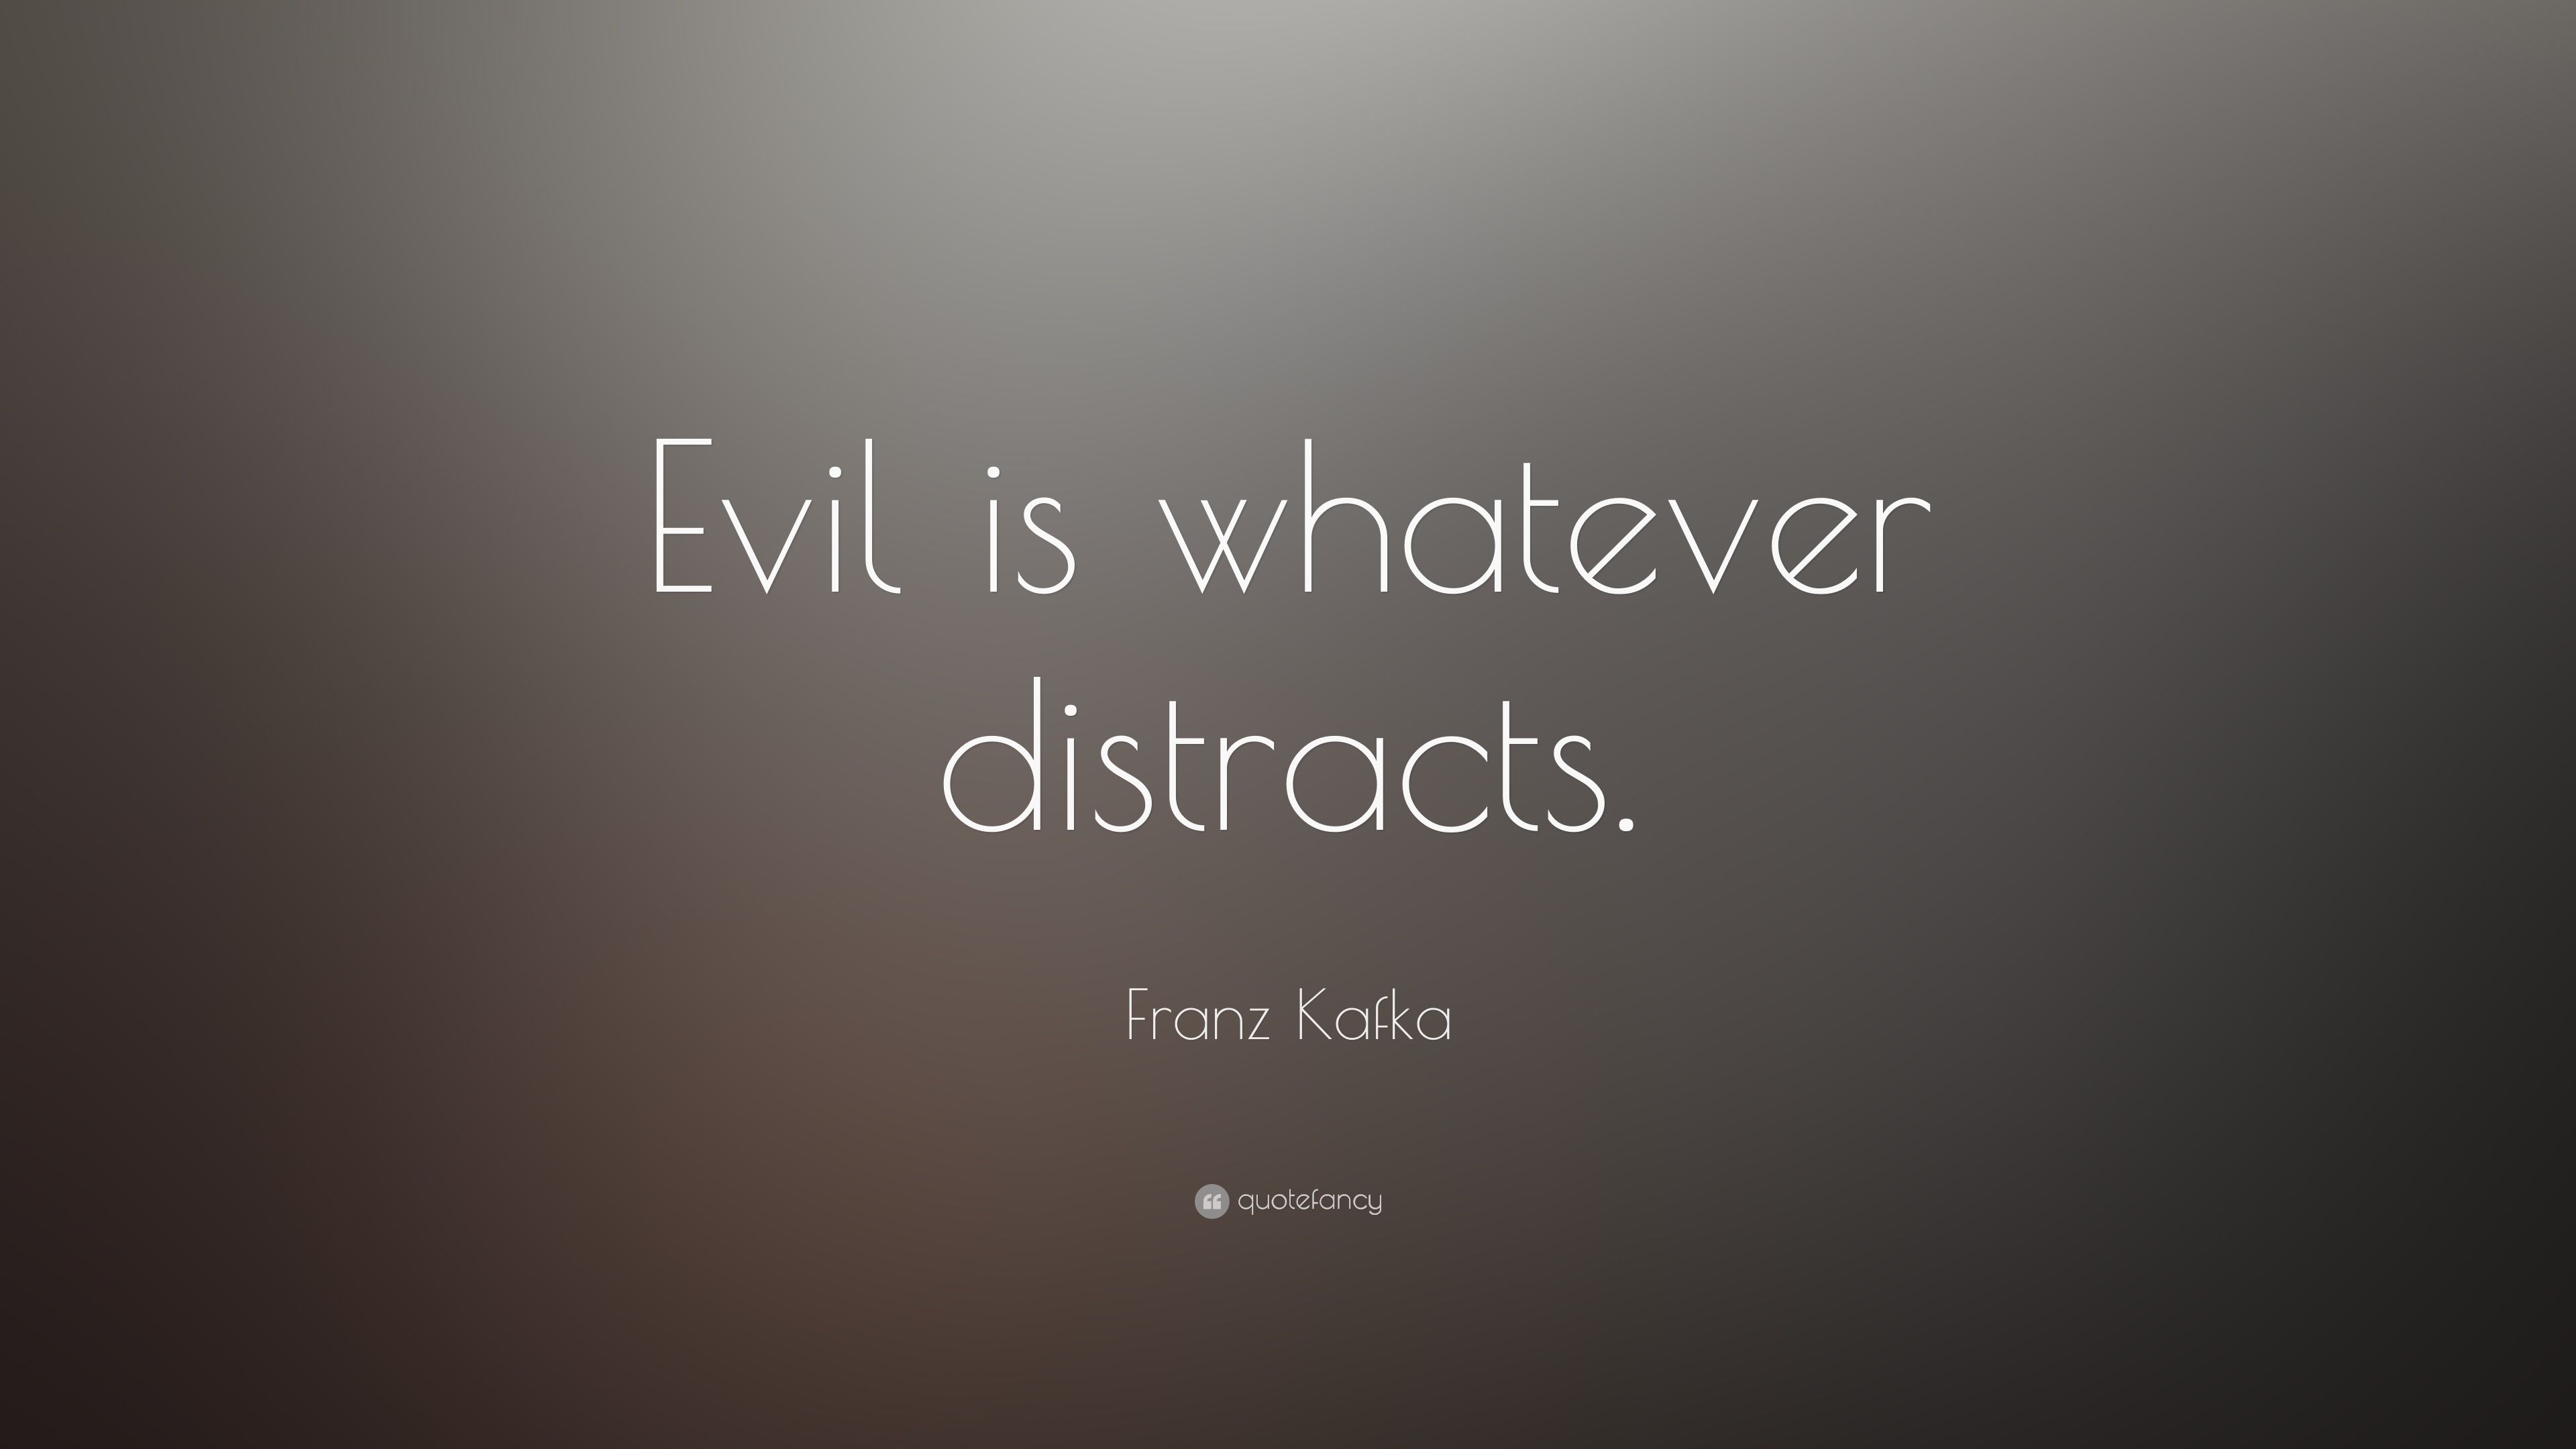 Franz Kafka Quote: “Evil is whatever distracts.” 20 wallpaper